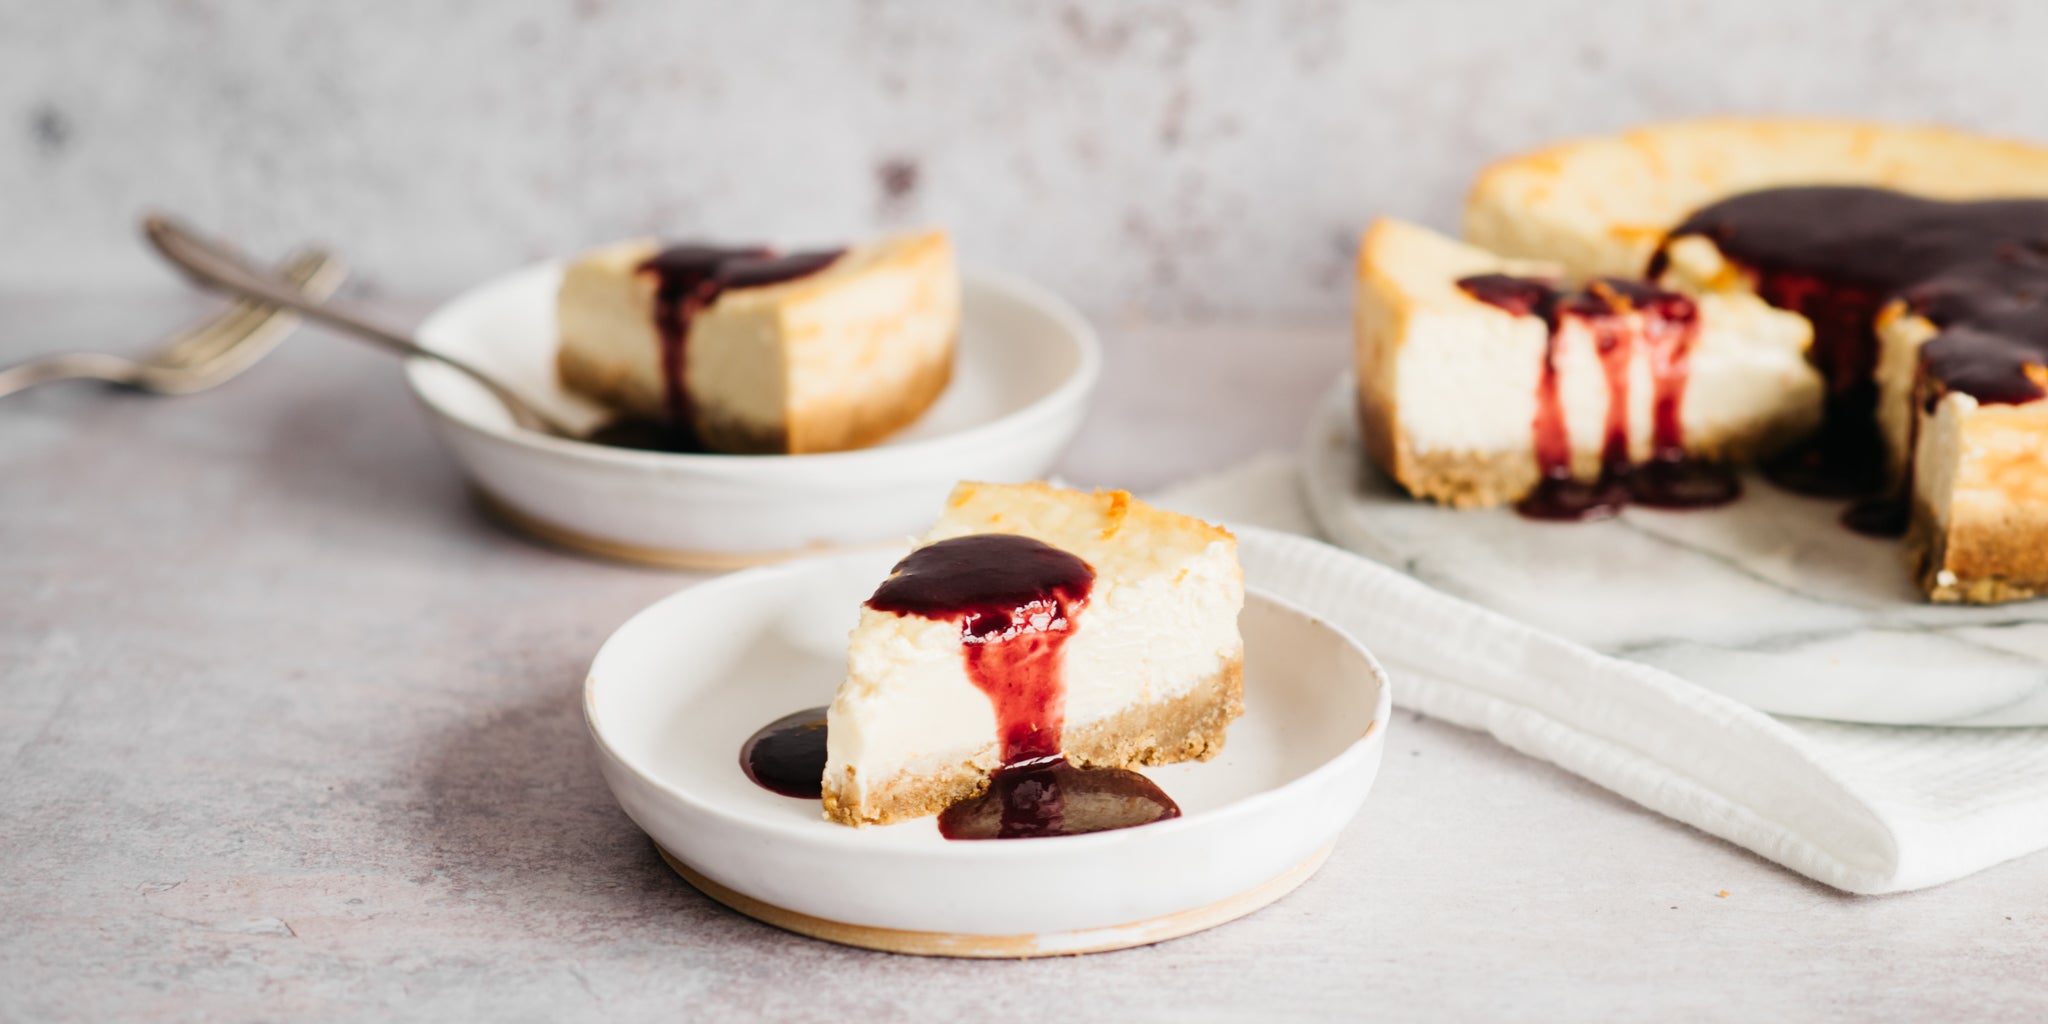 A slice of baked cheesecake in a bowl covered in raspberry sauce